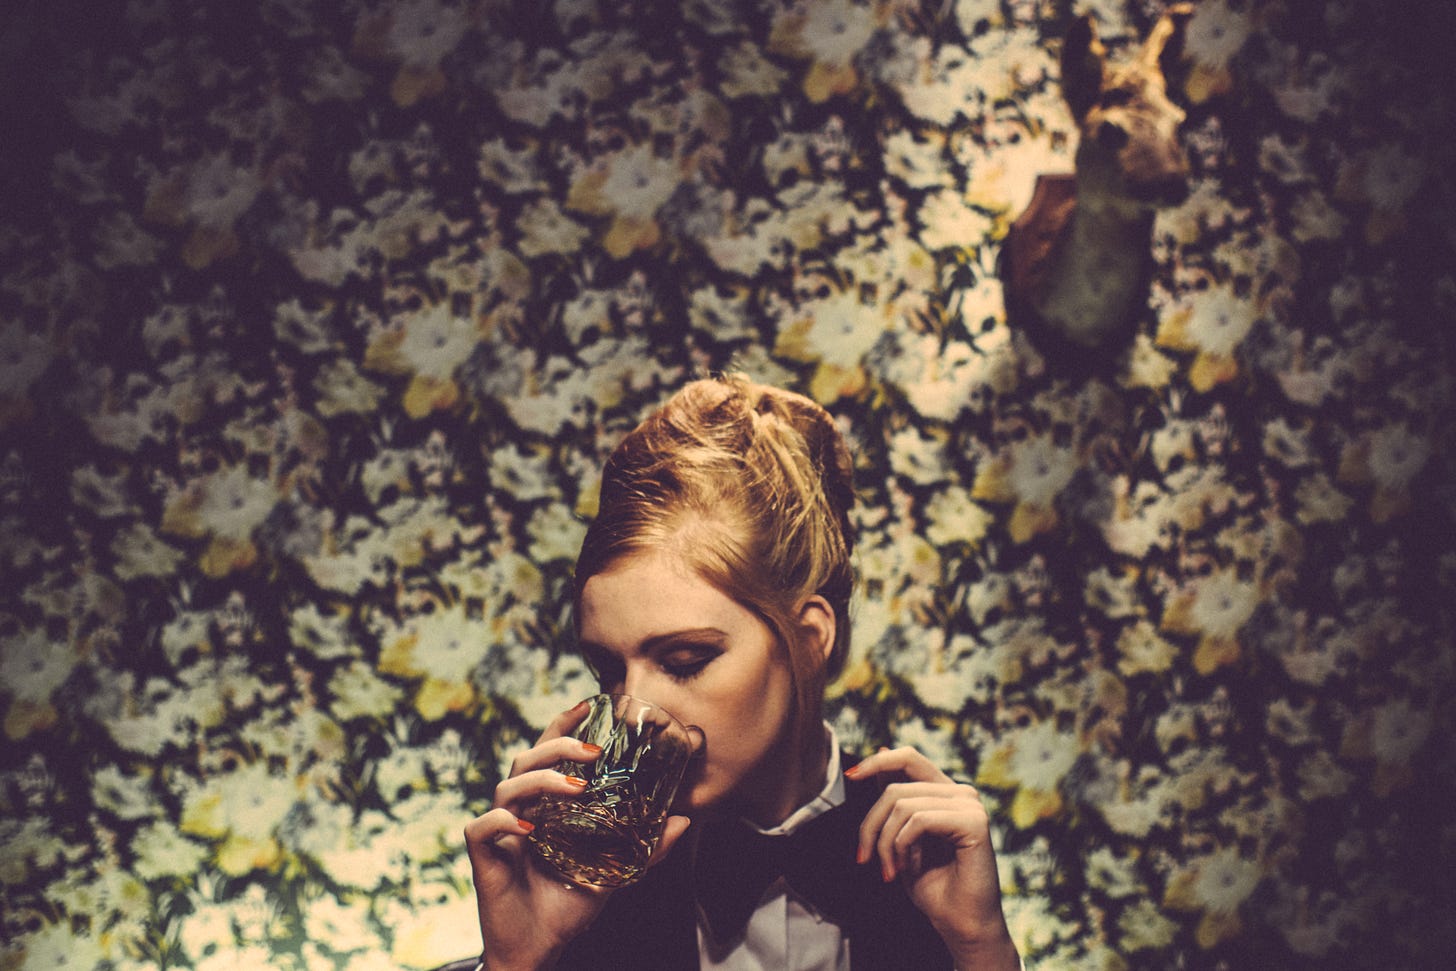 Woman with an updo drinking a cocktail in front of garish wallpaper with a taxidermied head of some sort on the wall